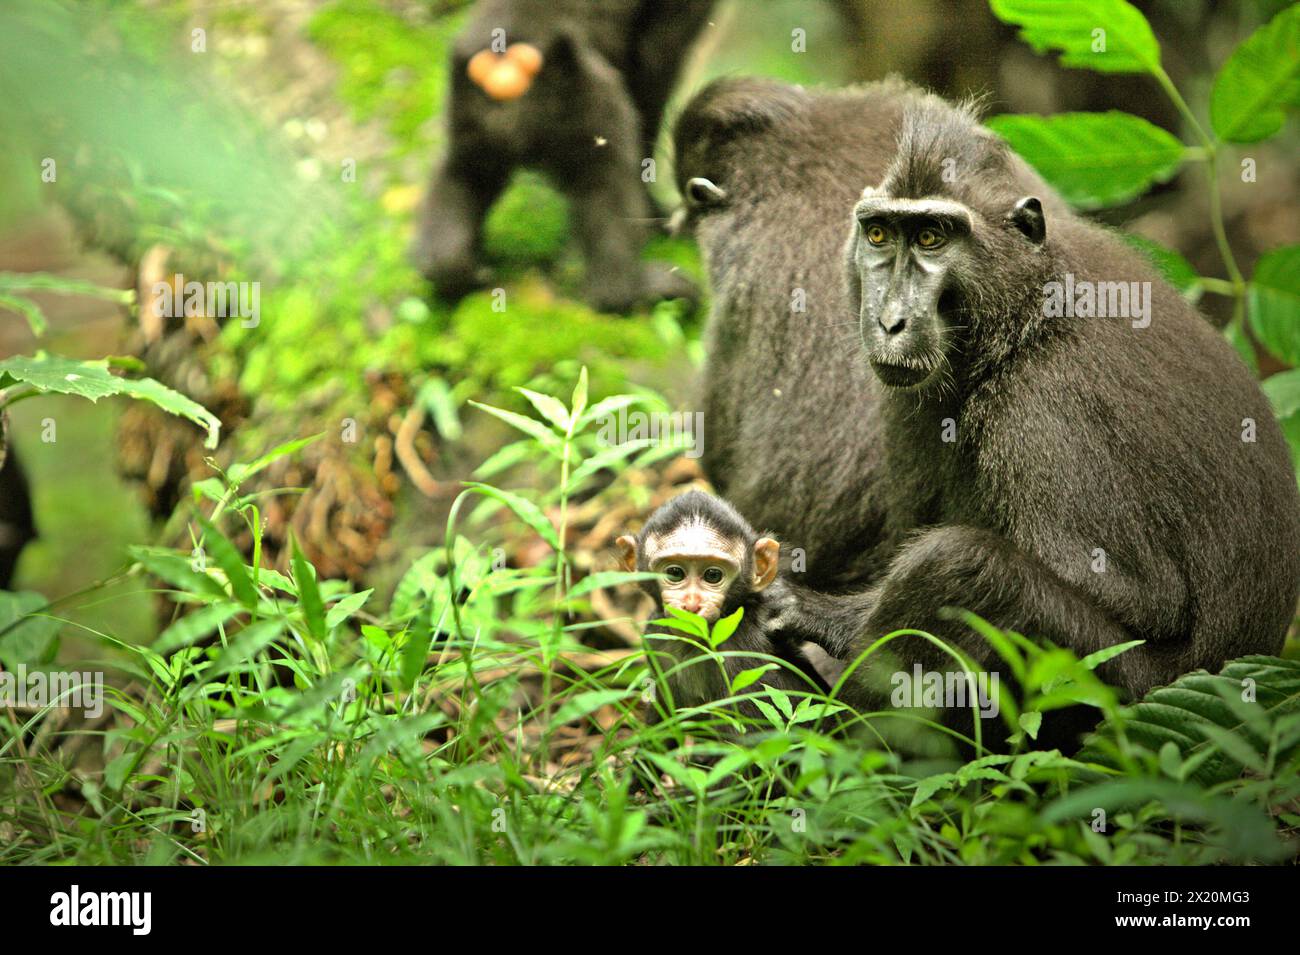 A crested macaque (Macaca nigra) offspring is being in the care of an adult female individual in Tangkoko forest, North Sulawesi, Indonesia. Climate change is one of the main factors affecting biodiversity worldwide at an alarming rate according to a team of scientists led by Antonio Acini Vasquez-Aguilar in their March 2024 research paper published on Environ Monit Assess. It might shift the geographic distribution of species, including species which depend greatly on forest cover such as primates, they say. Stock Photo